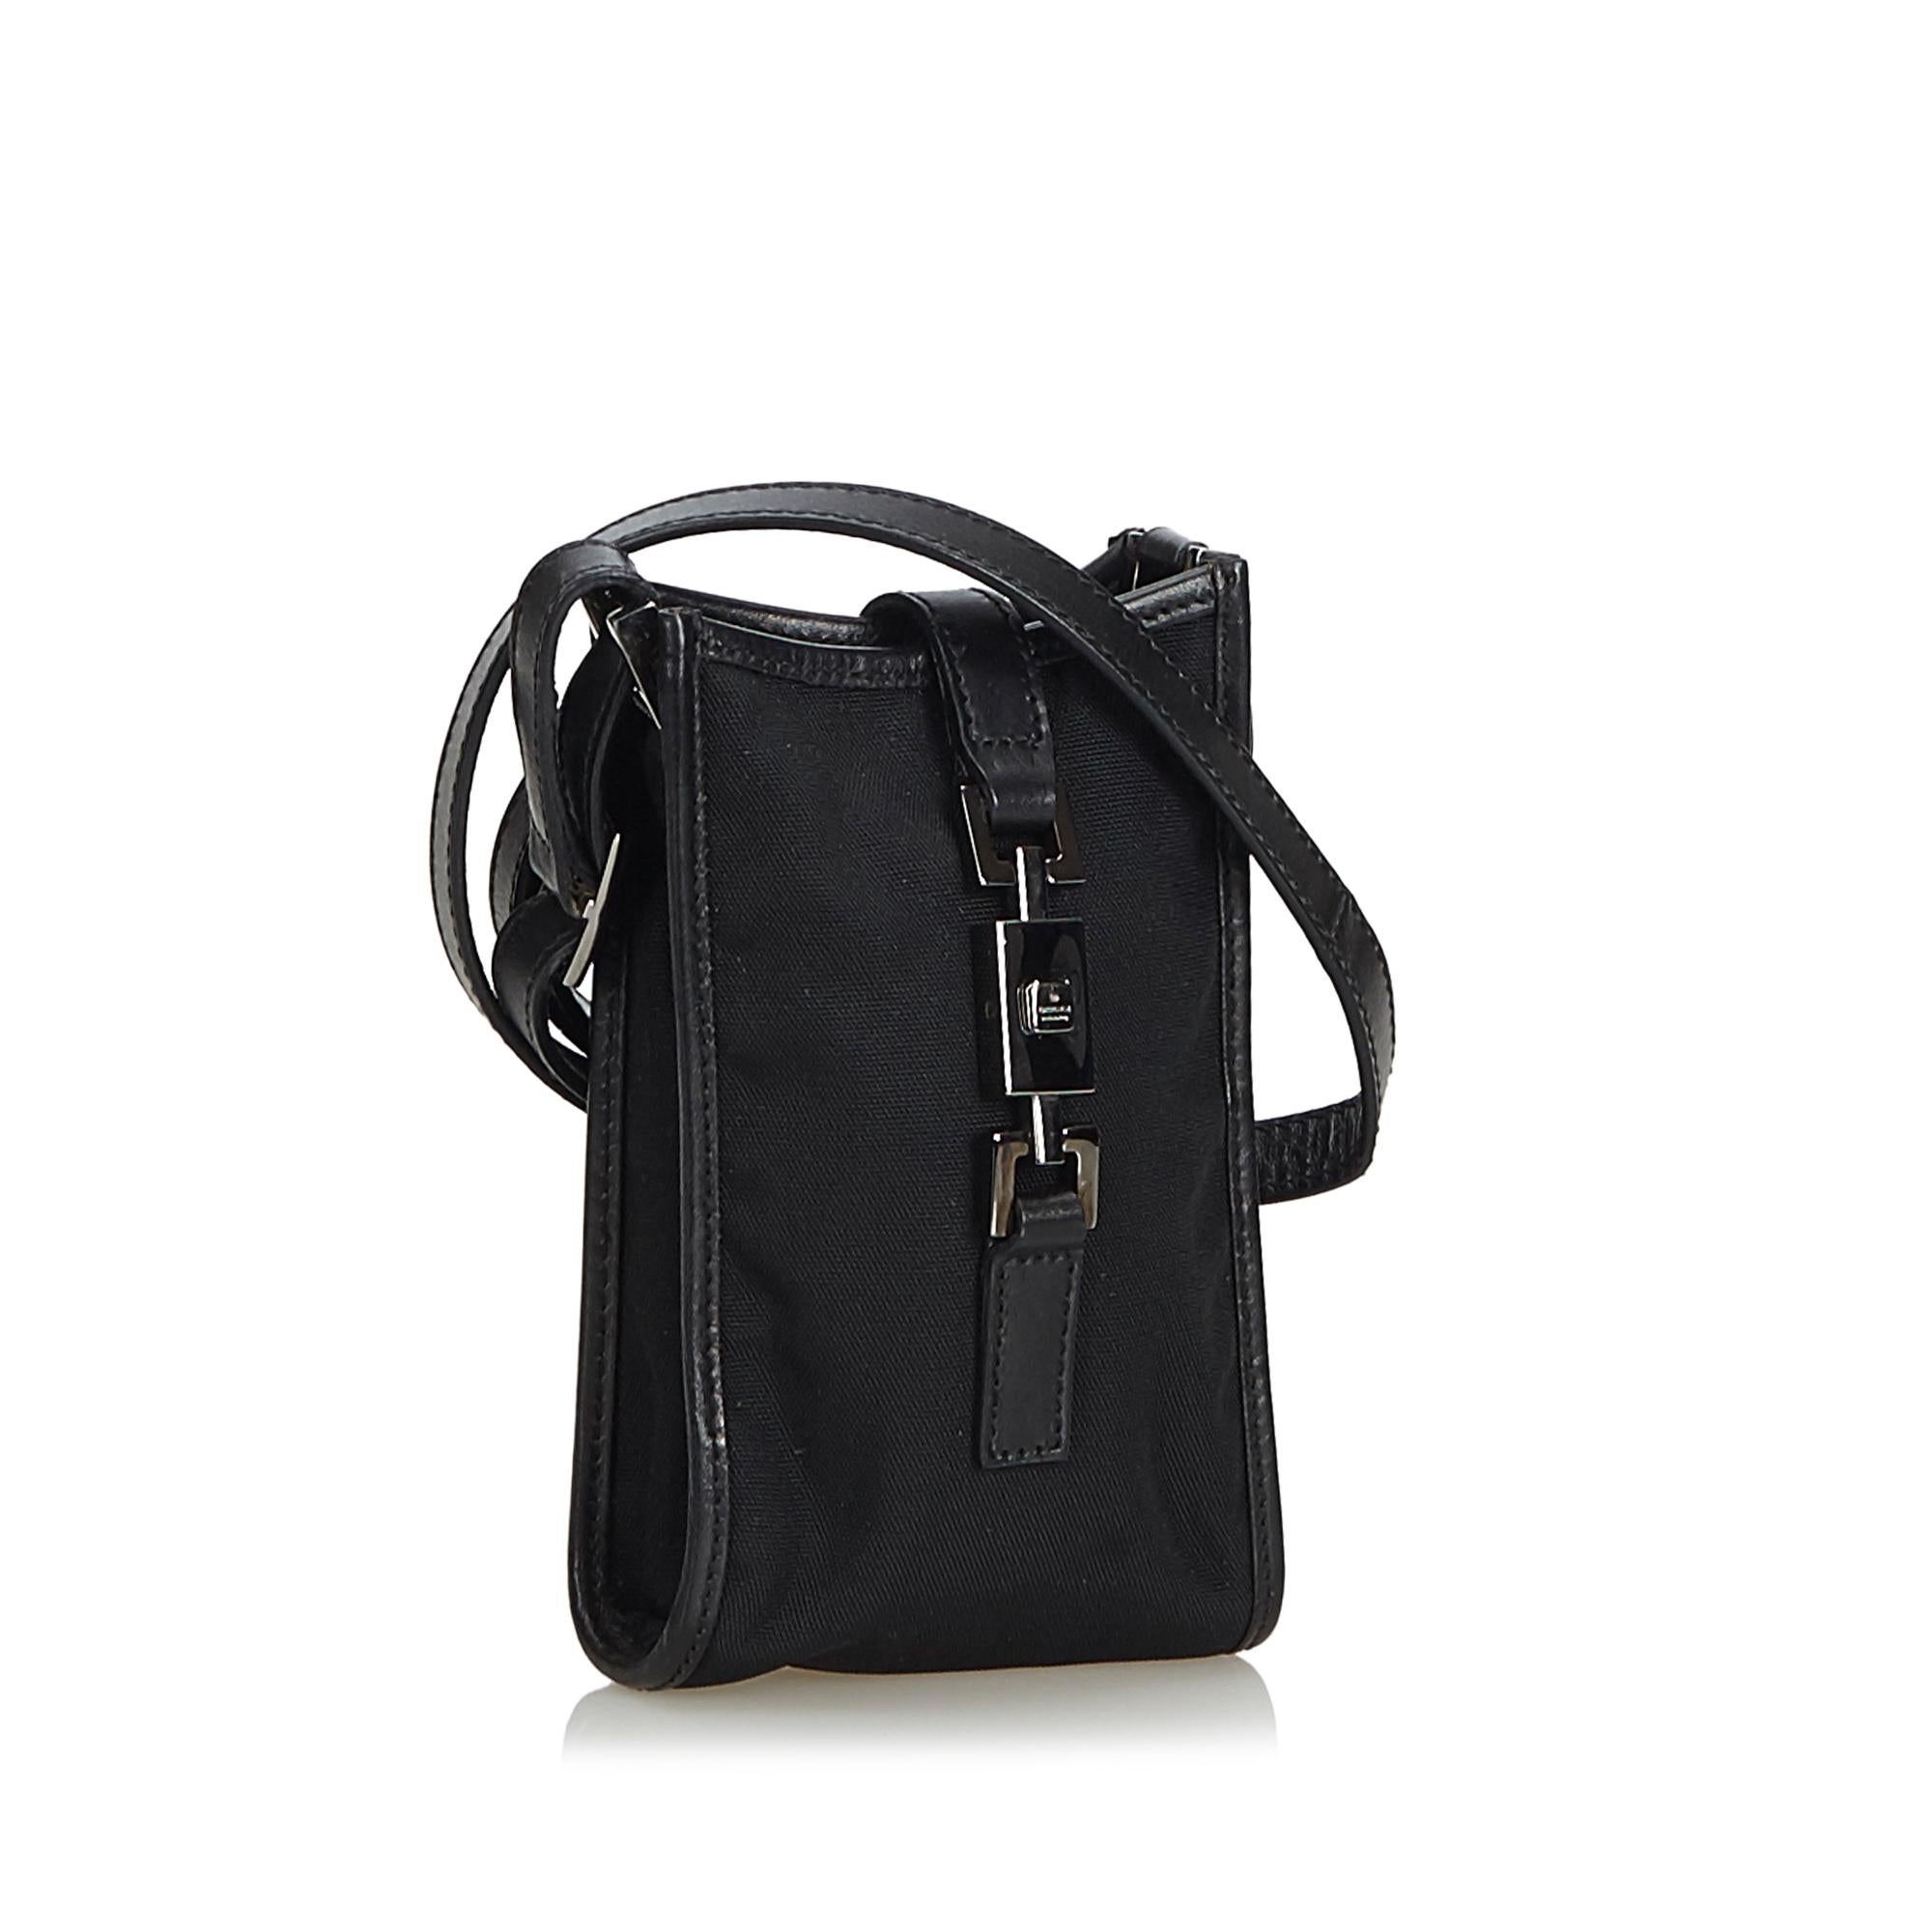 This crossbody bag features a nylon body, a flat adjustable leather strap, and an open top with a fold over flat strap with metal details. It carries as B+ condition rating.

Inclusions: 
This item does not come with inclusions.

Dimensions:
Length: